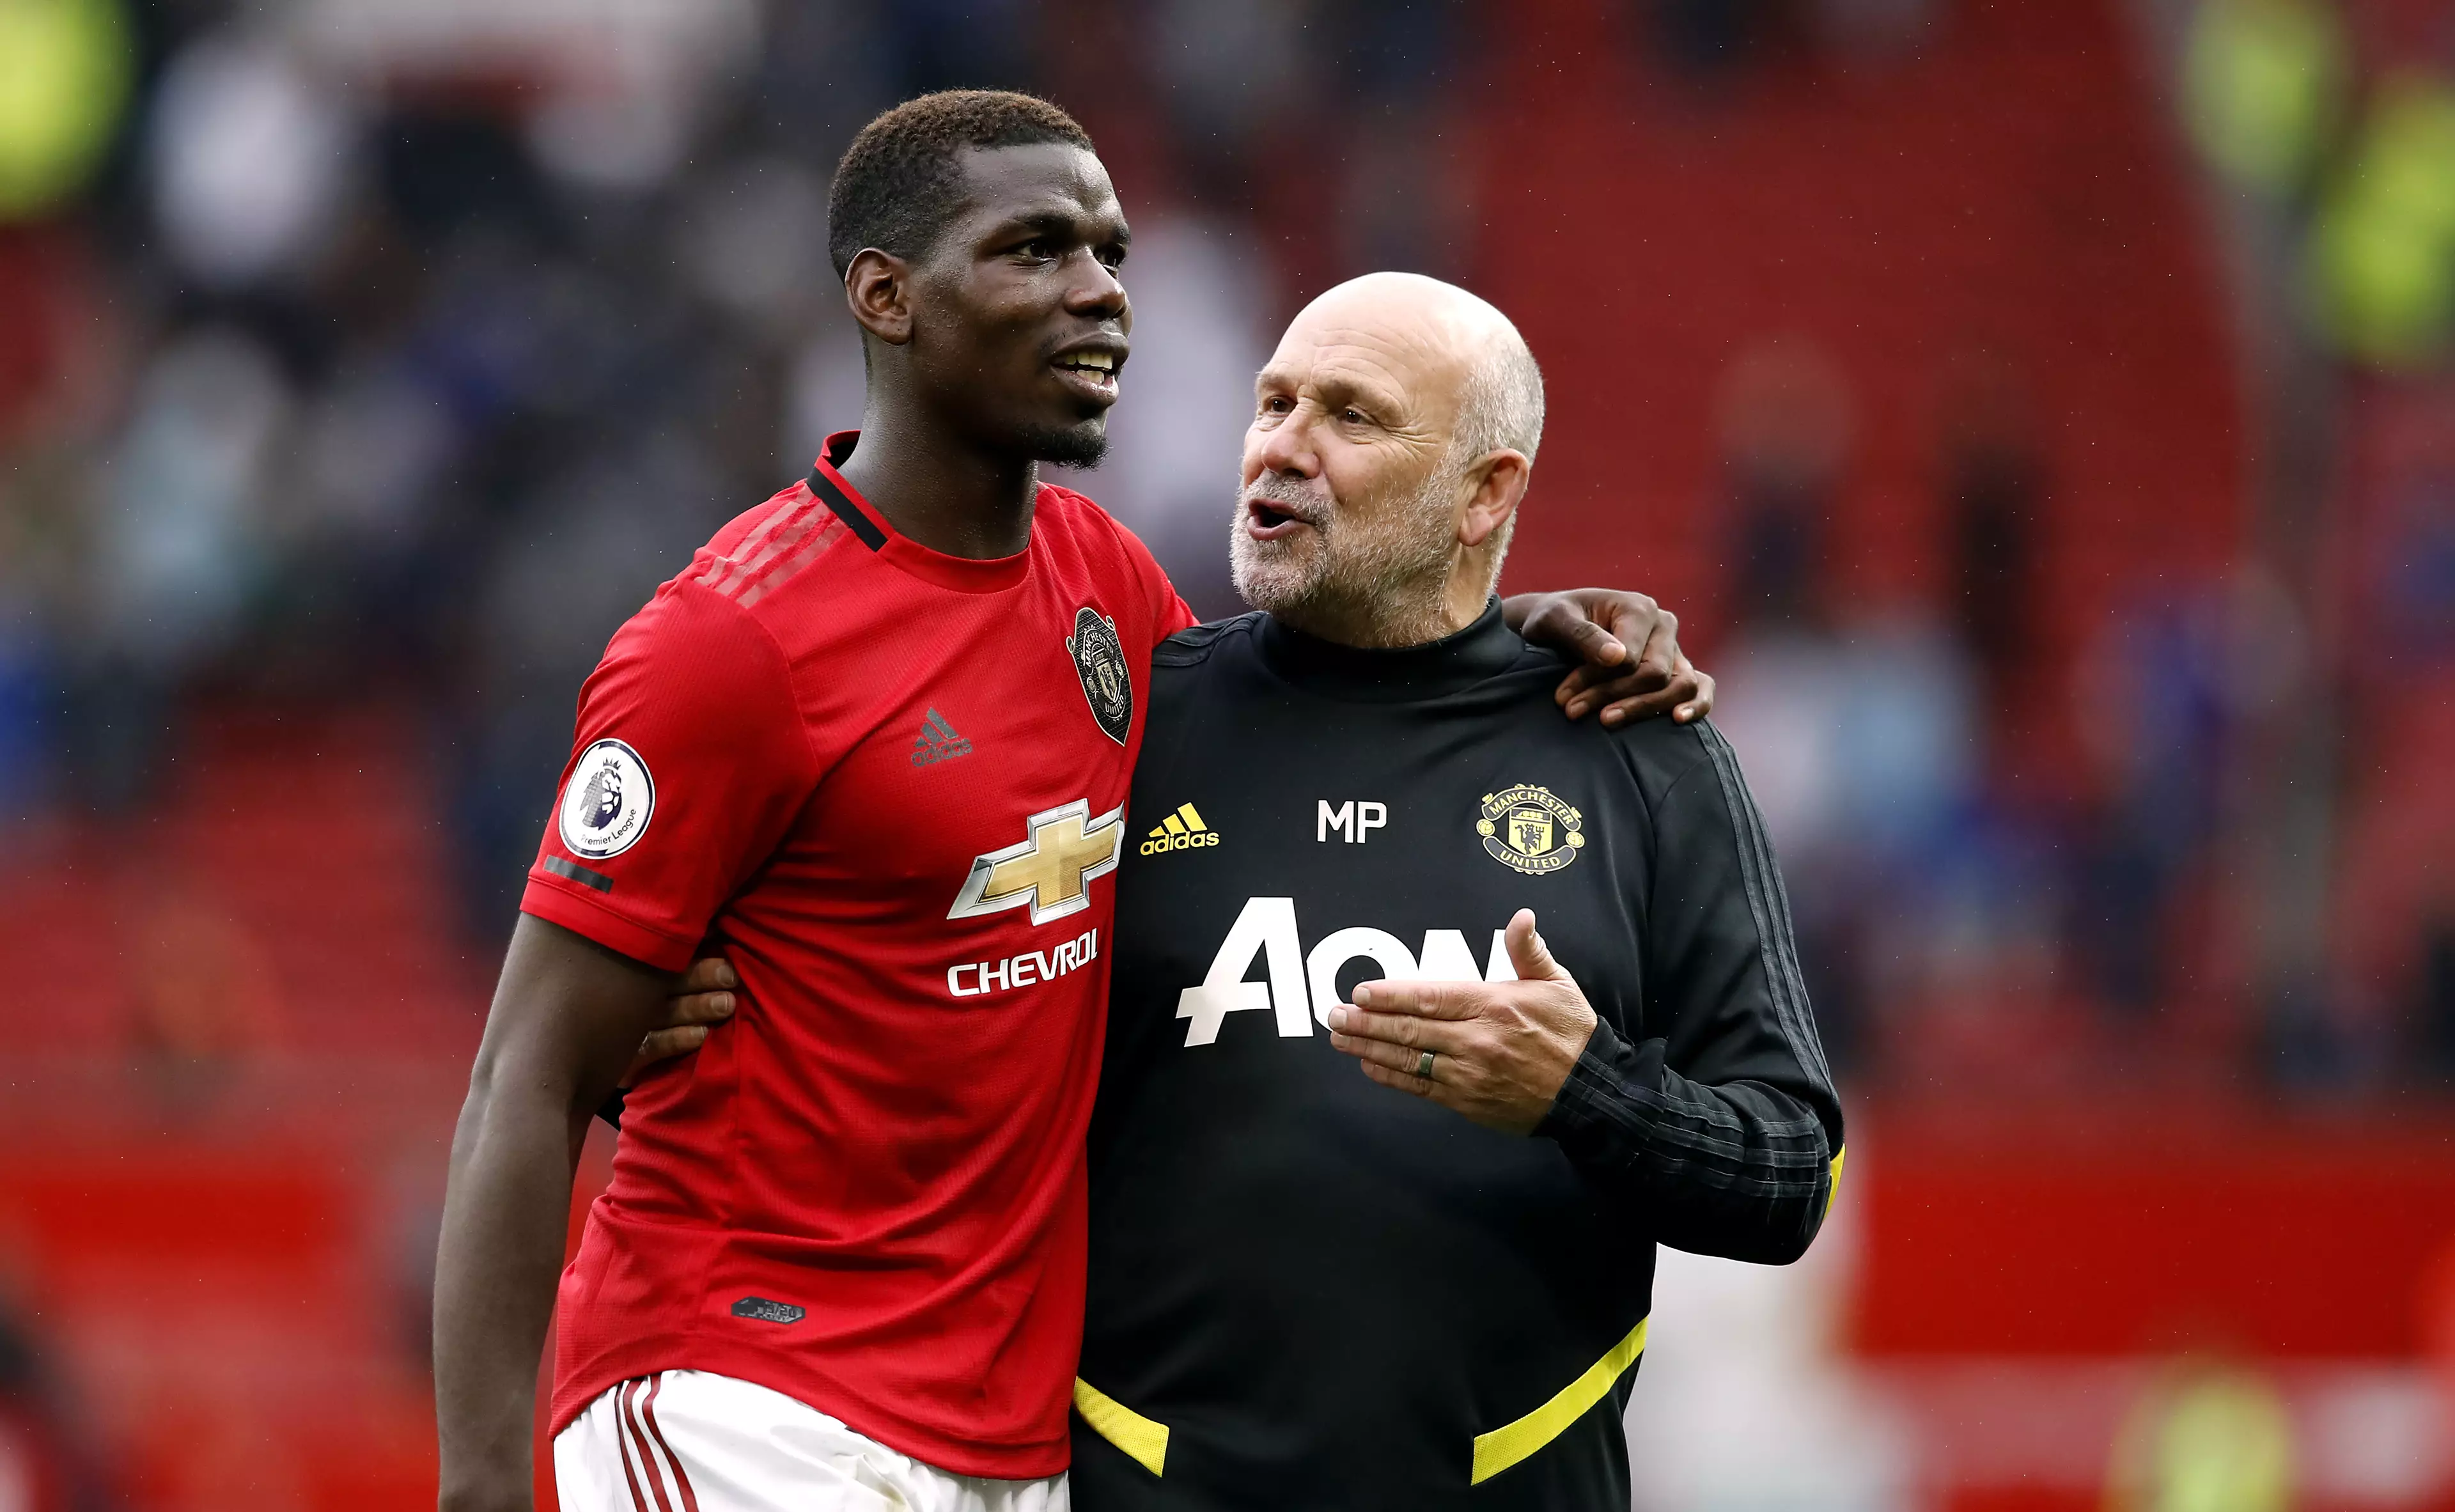 Paul Pogba and Manchester United's assistant manager Mike Phelan.